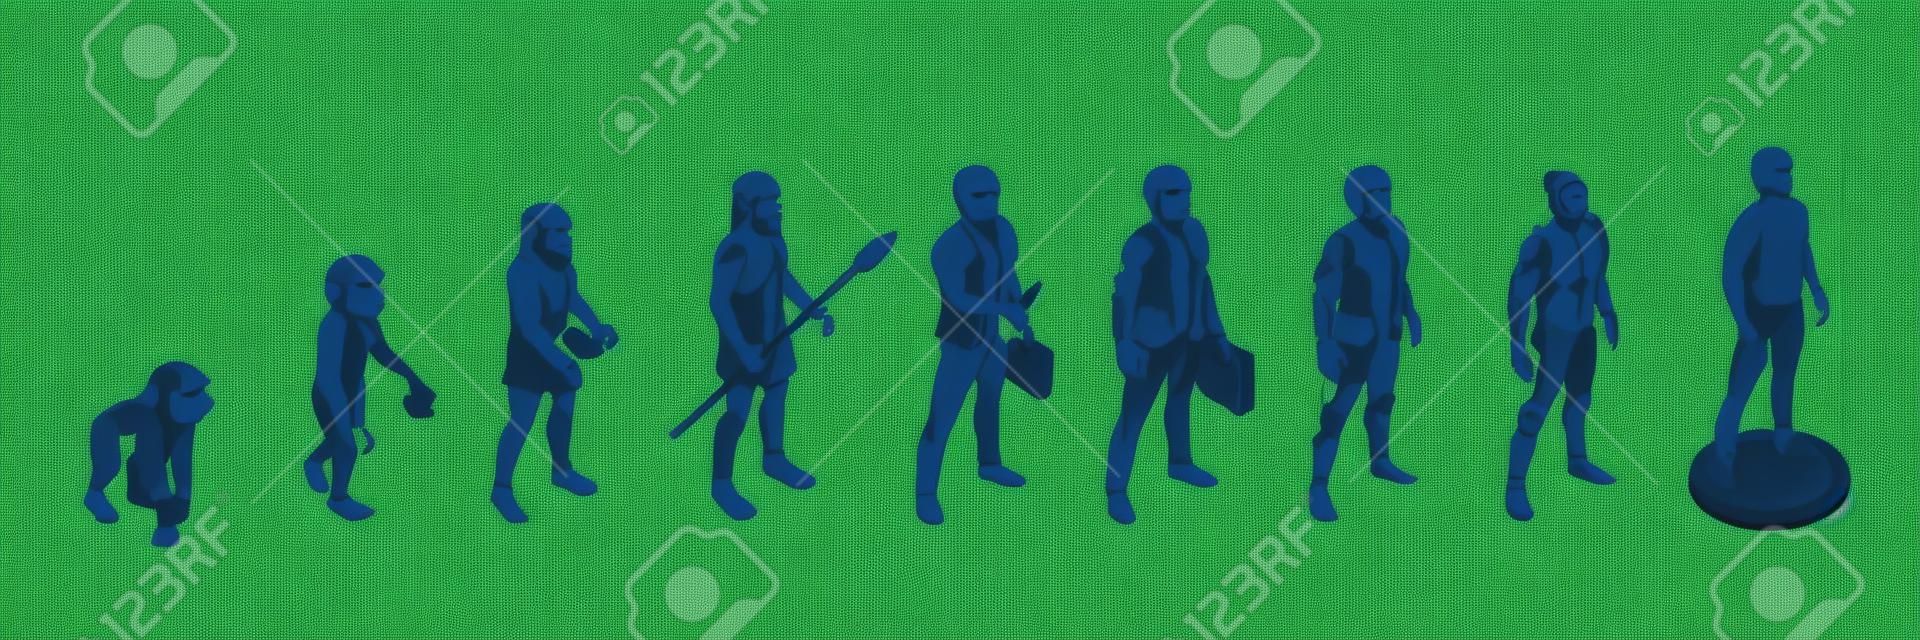 Human evolution of man from ape monkey to digital world technology, life development process vector icons. People evolution from caveman primitives to modern life and to cyborg artificial intelligence